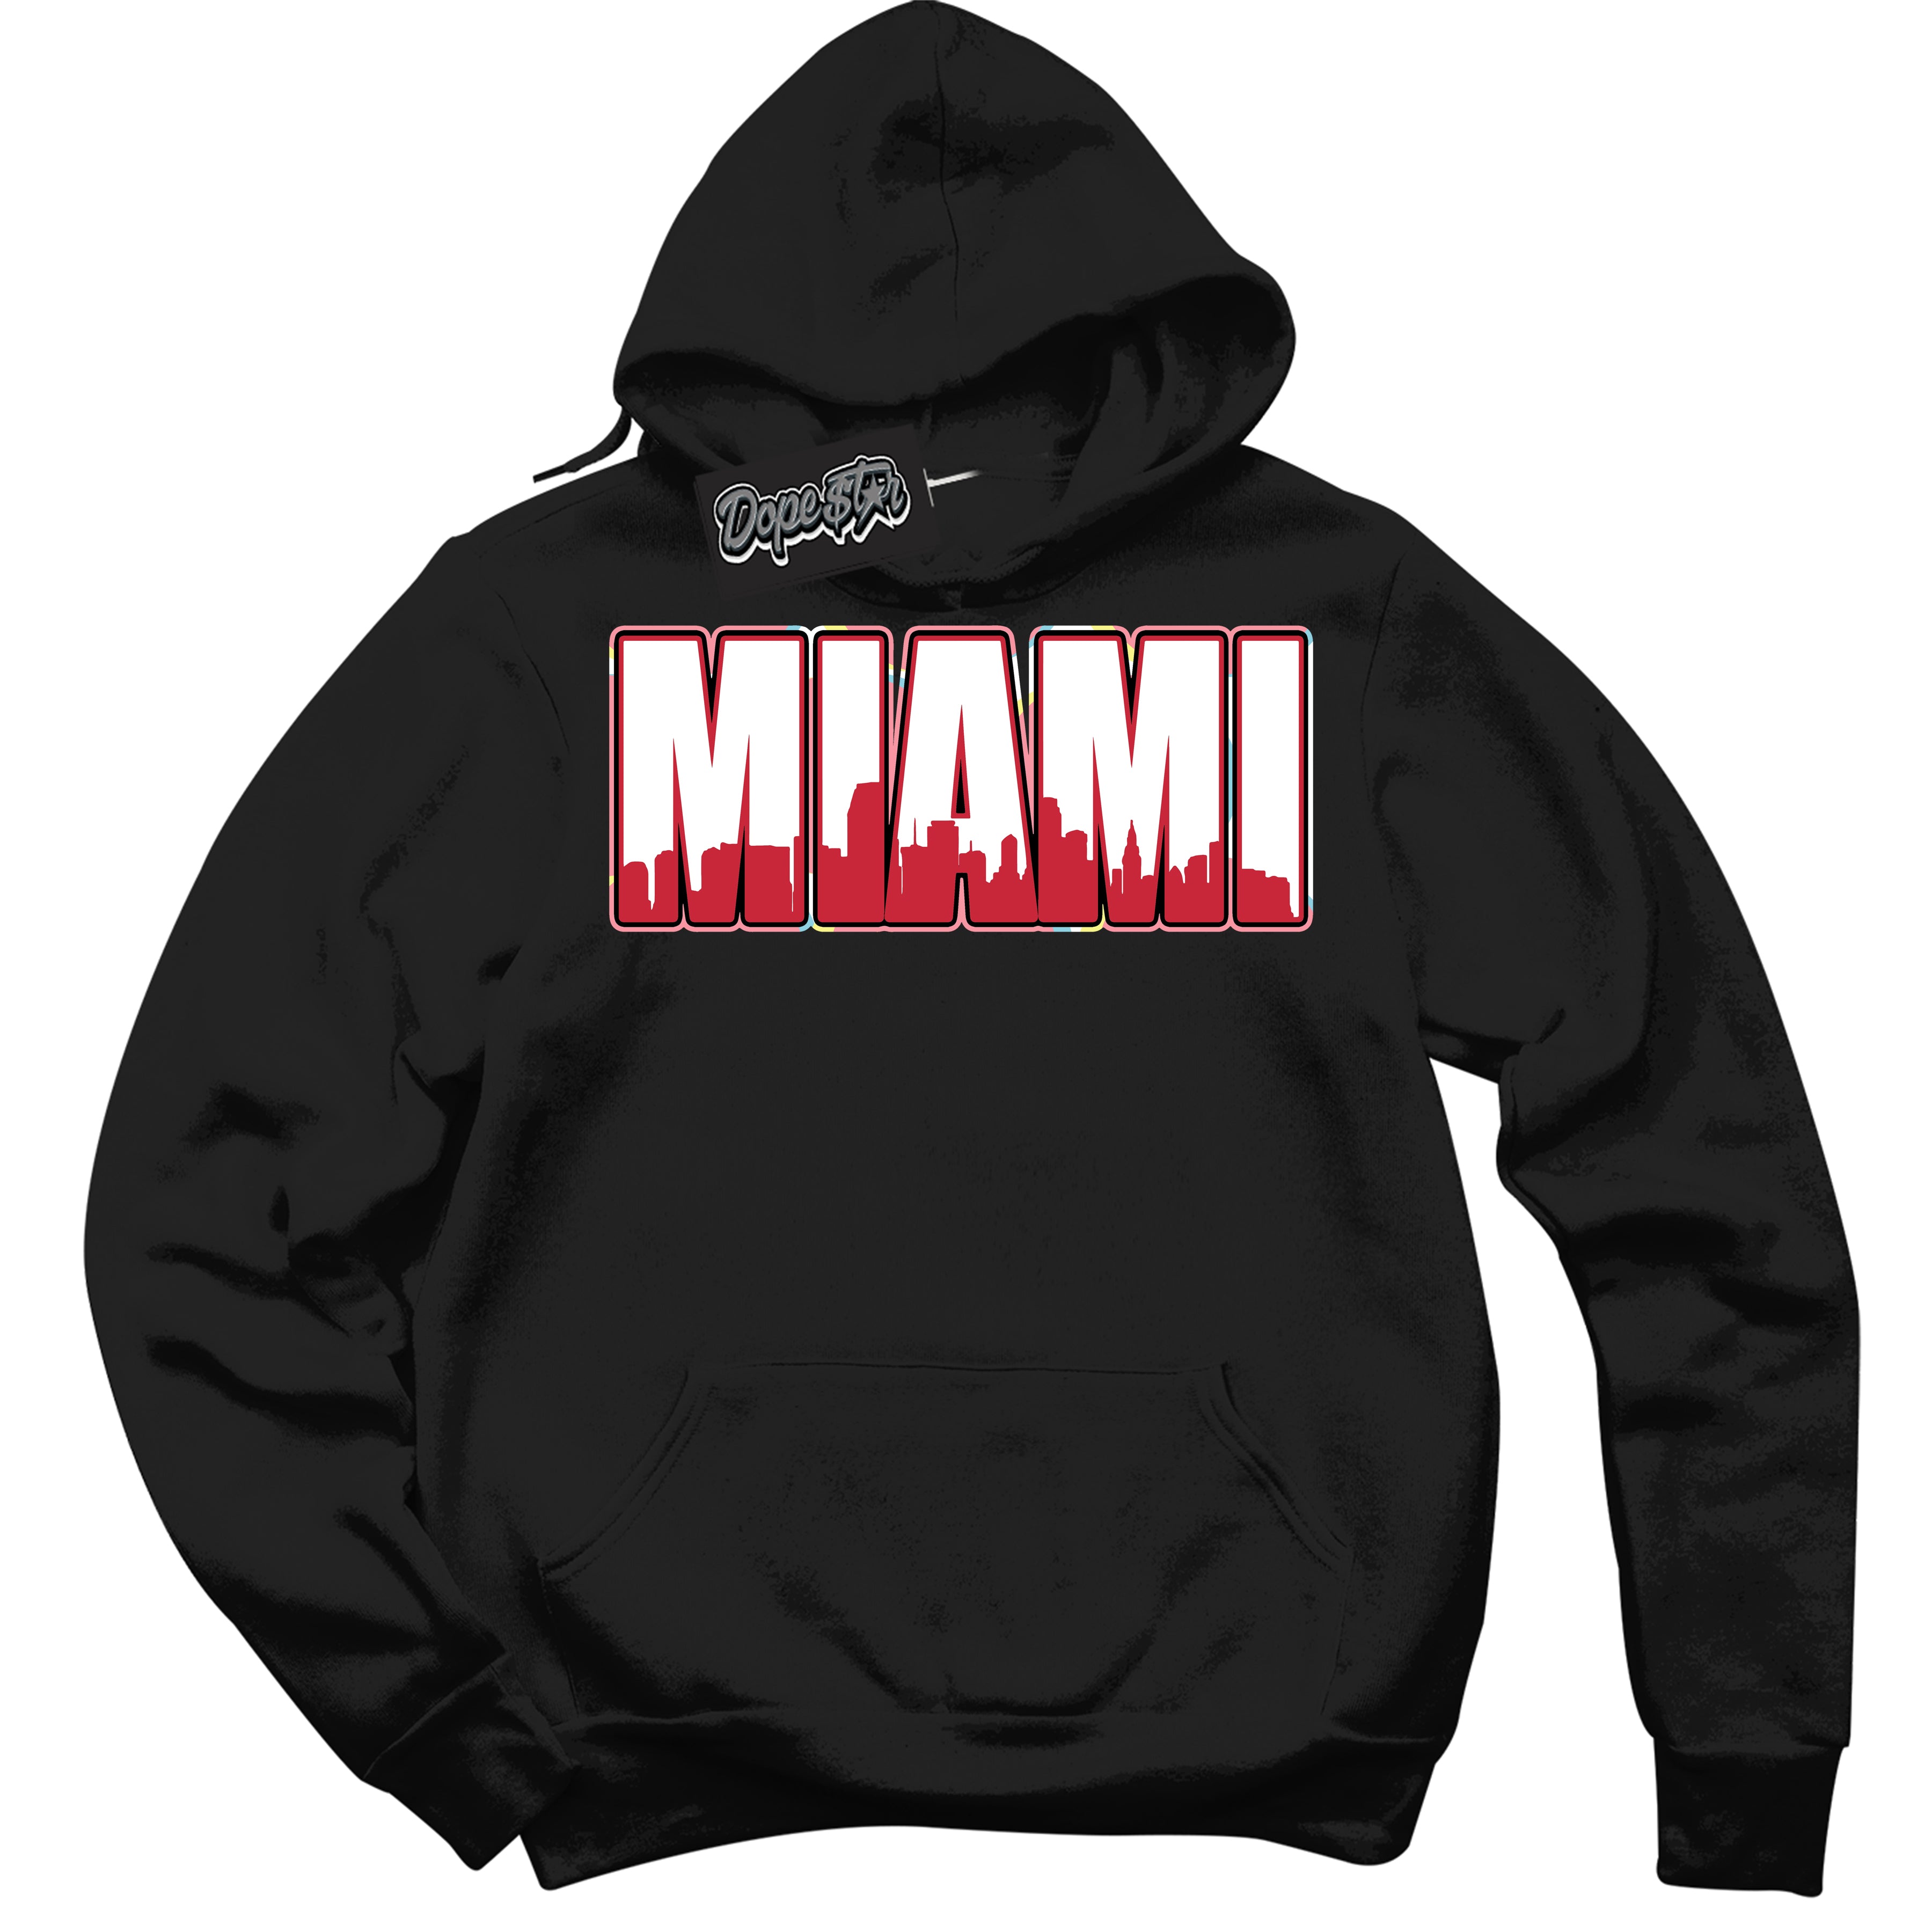 Cool Black Graphic DopeStar Hoodie with “ Miami “ print, that perfectly matches Spider-Verse 1s sneakers